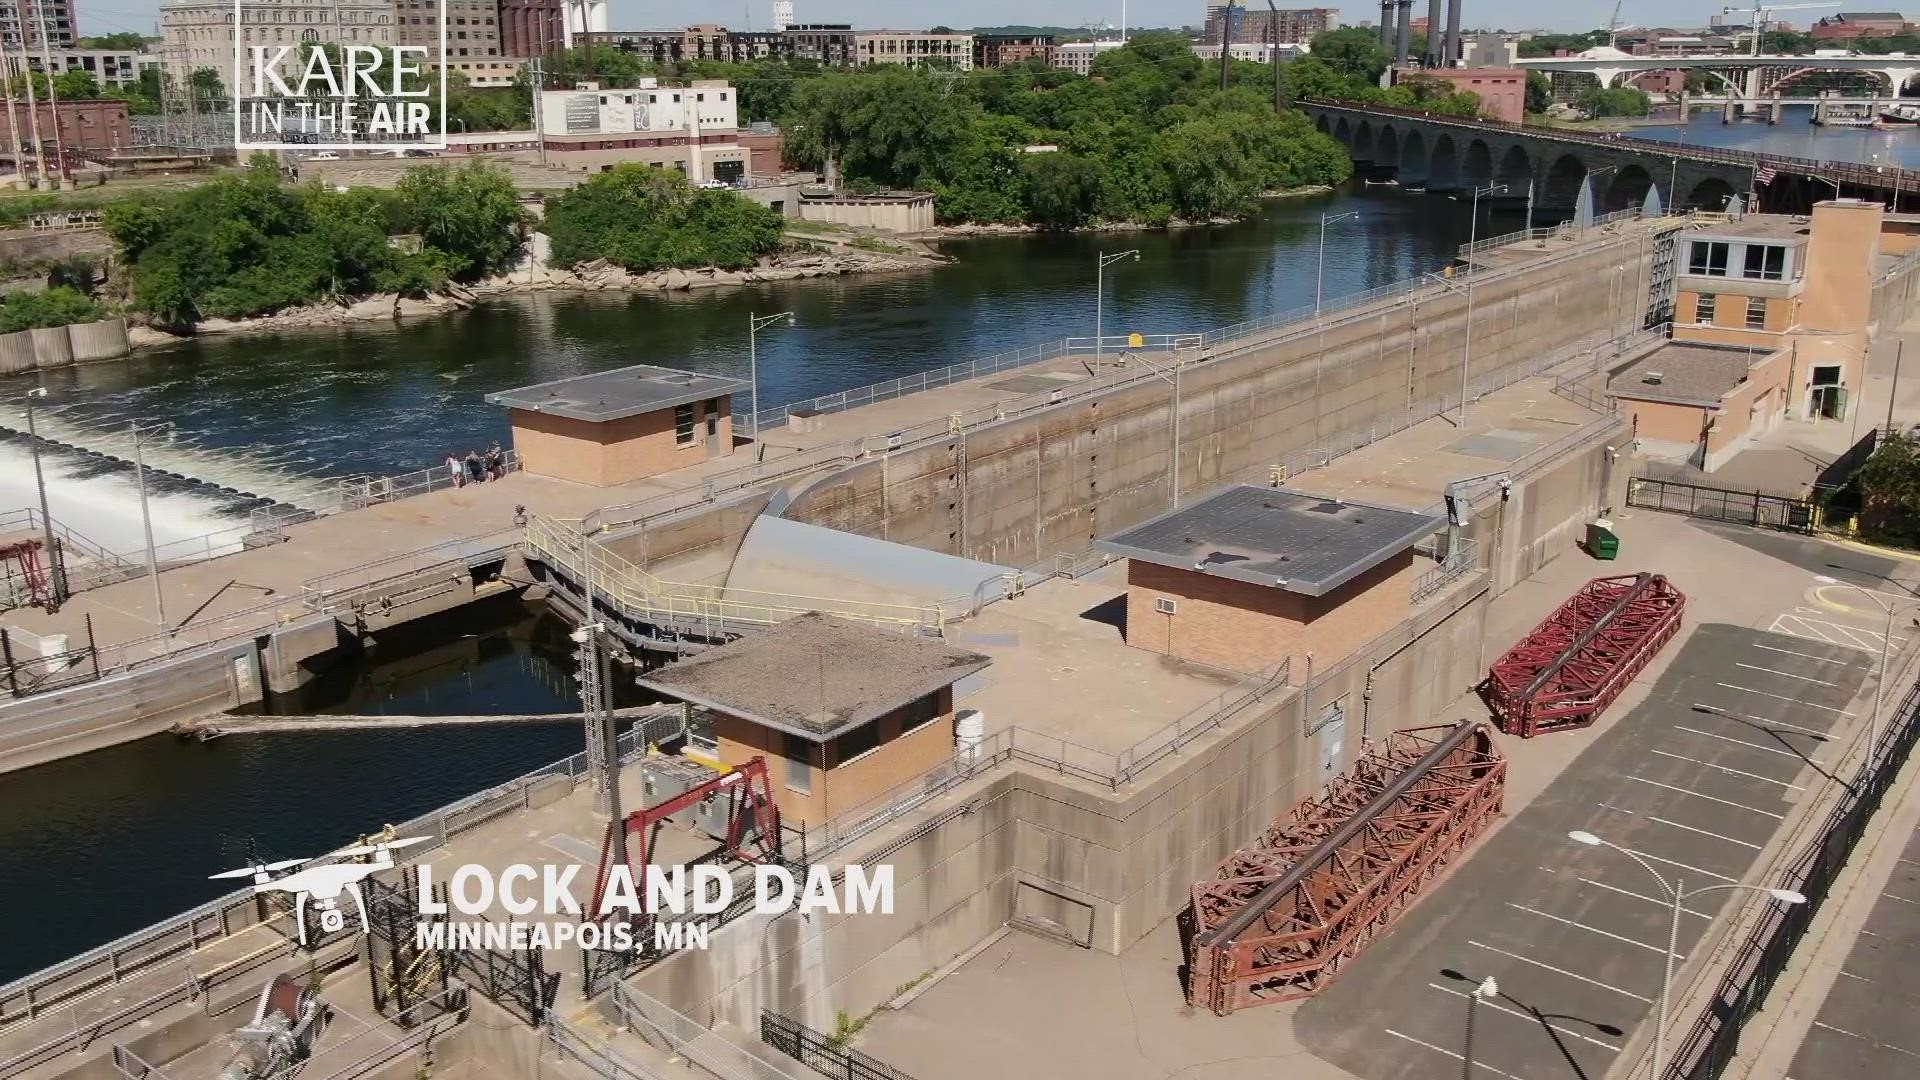 With a lift of 49 feet, the lock at St. Anthony Falls accounts for more than 10% of the total height change of the Mississippi between the Twin Cities and St. Louis.